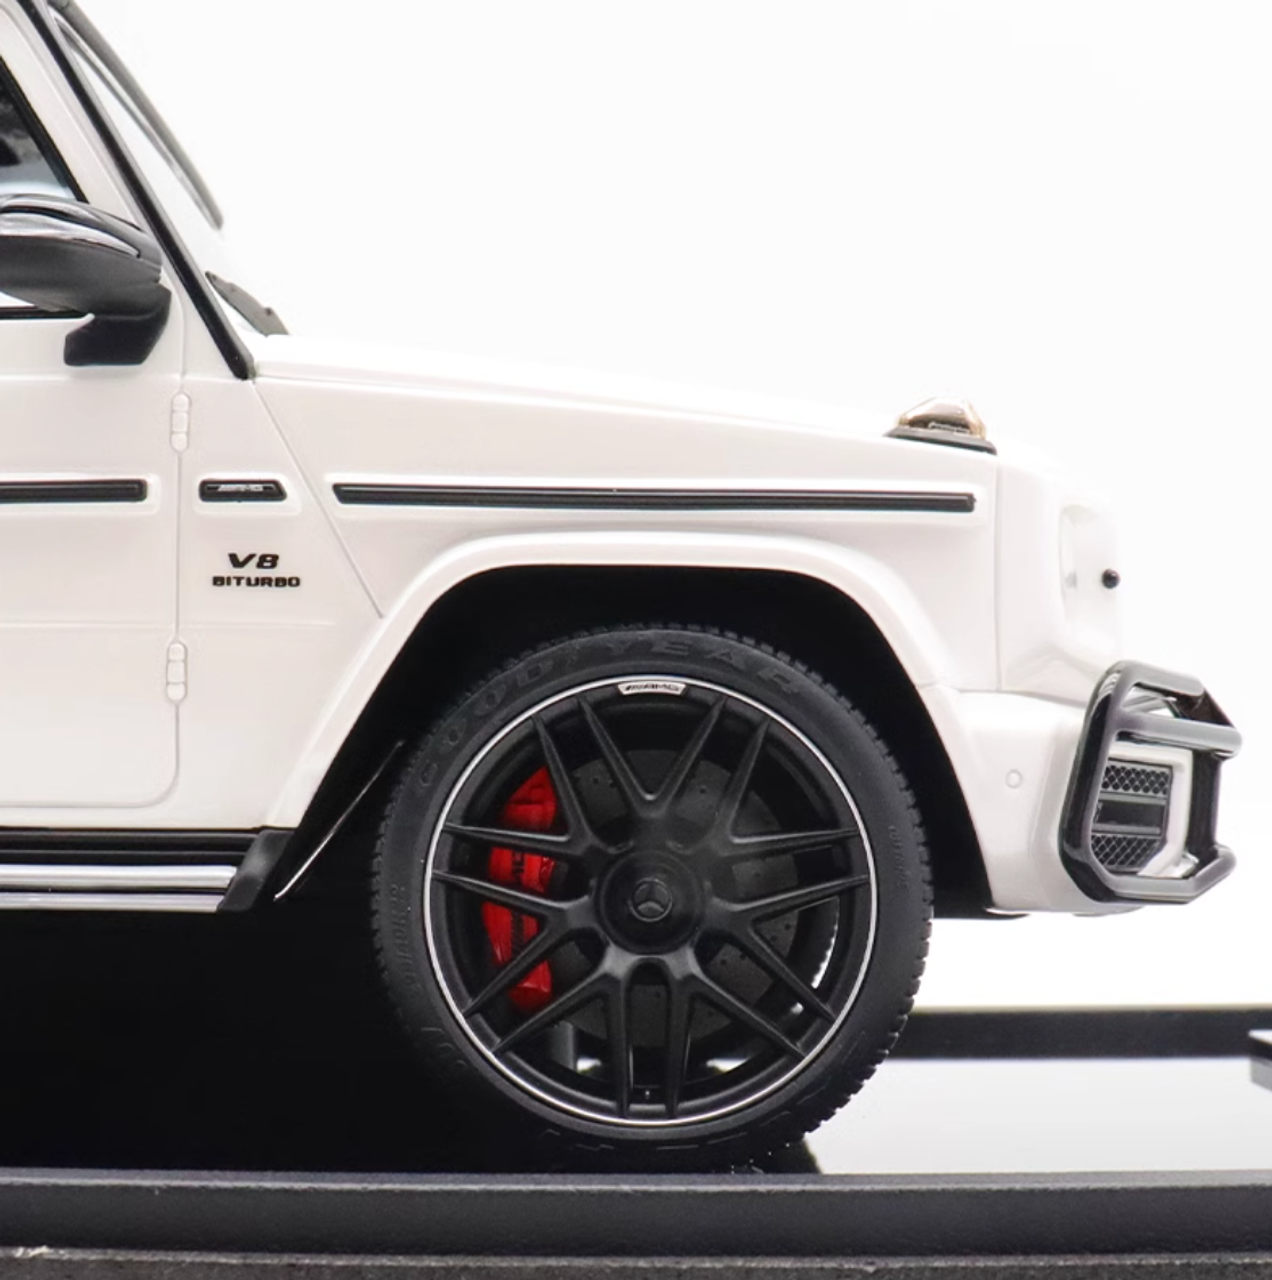 1/18 MH Motorhelix Mercedes-Benz Mercedes G63 AMG (White) Resin Car Model  Limited 60 Pieces